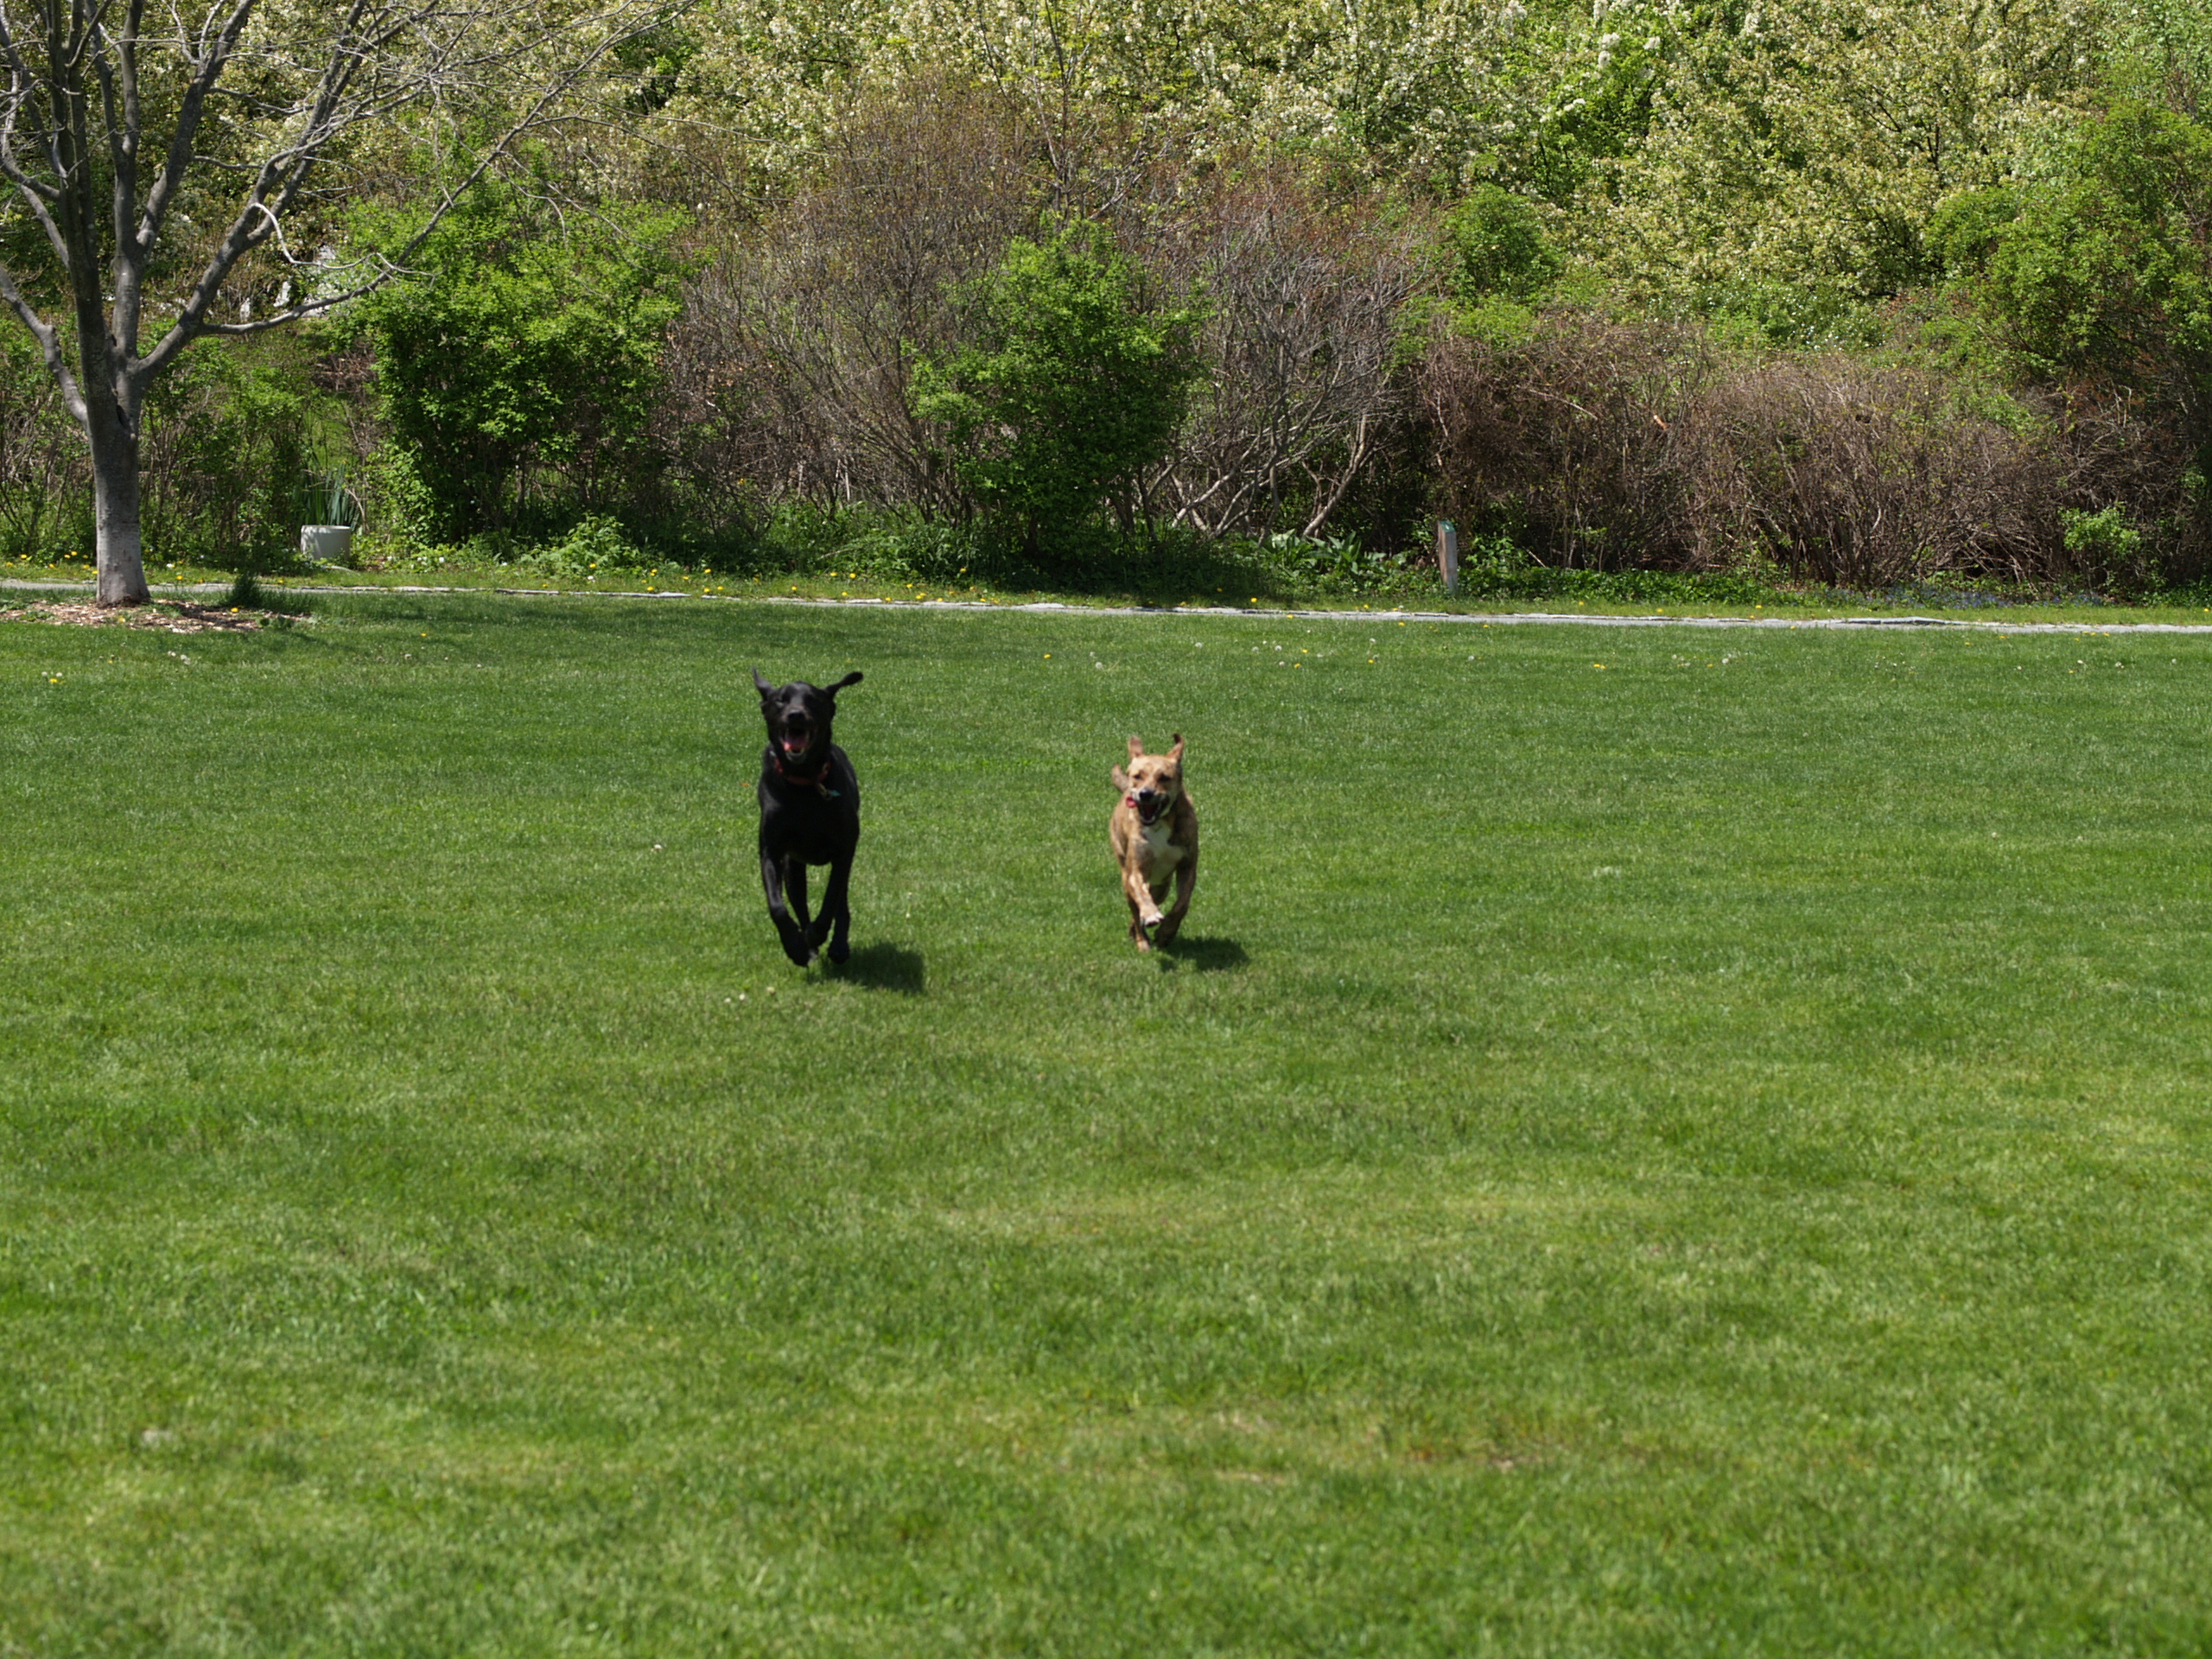 Dogs at the park